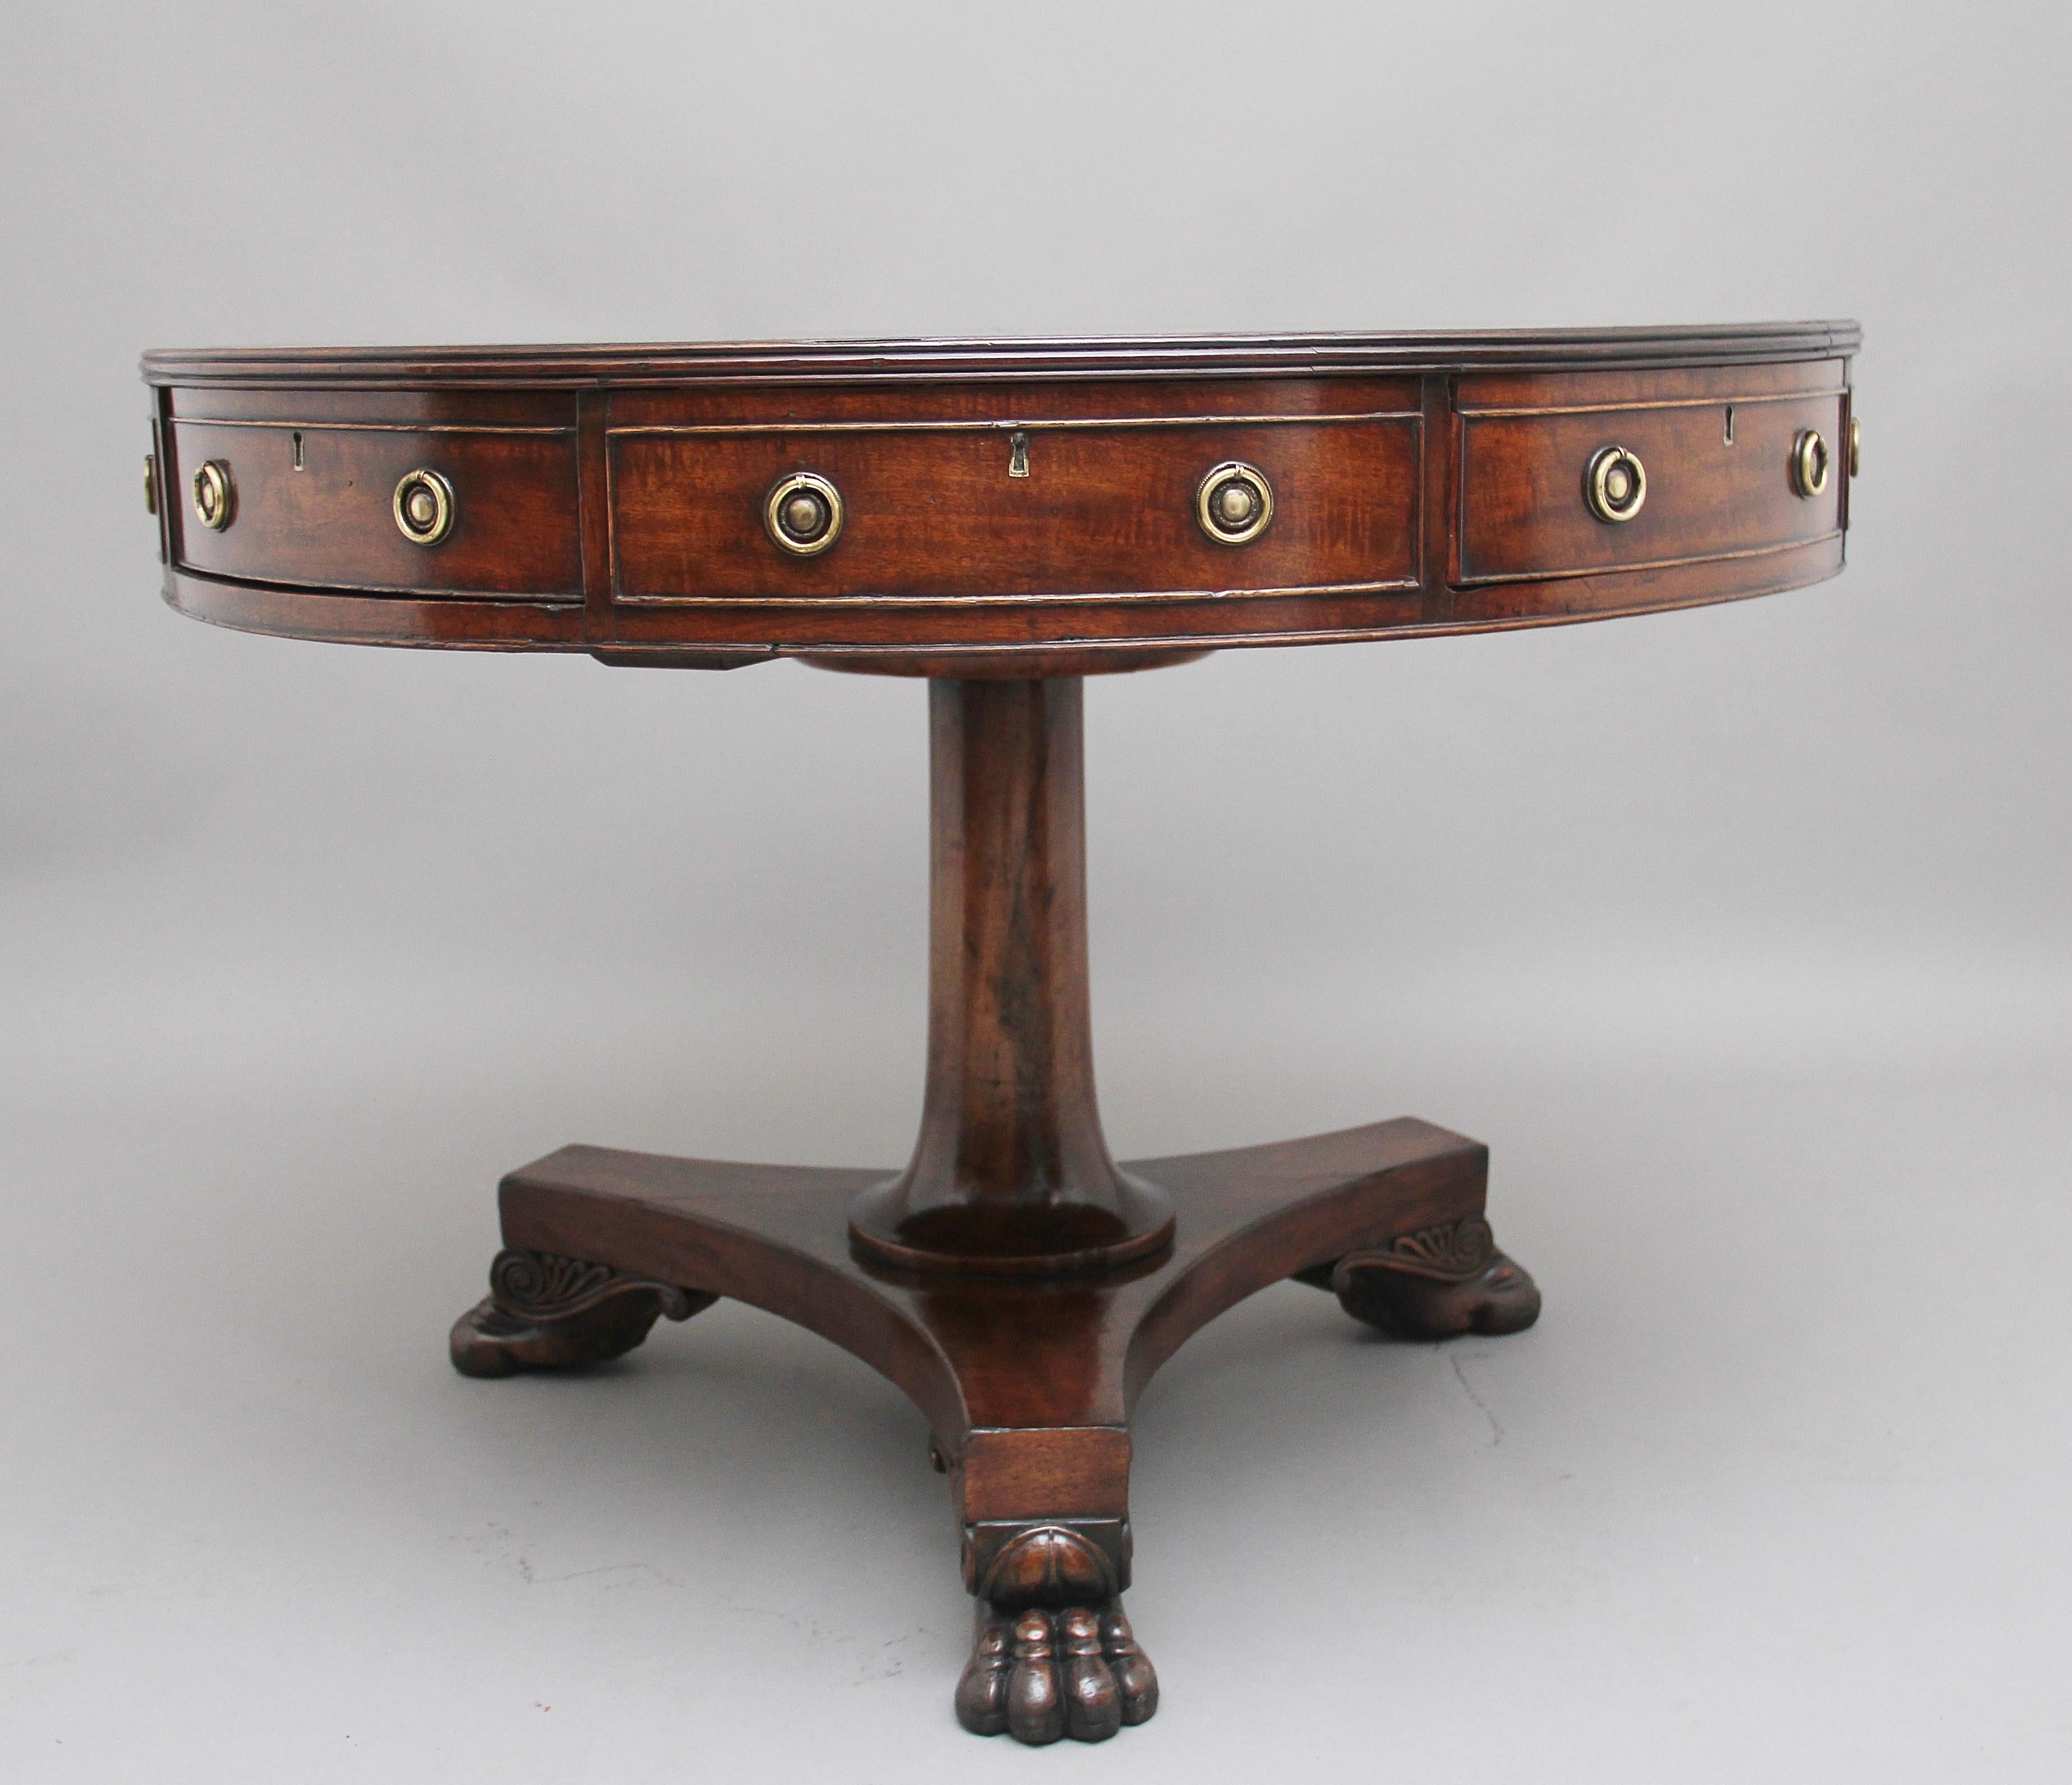 Early 19th Century mahogany drum table, having a green leather leather top decorated with blind and gold tooling and crossbanded in mahogany around the edge, the frieze below having a combination of four working drawers and four faux drawers, all